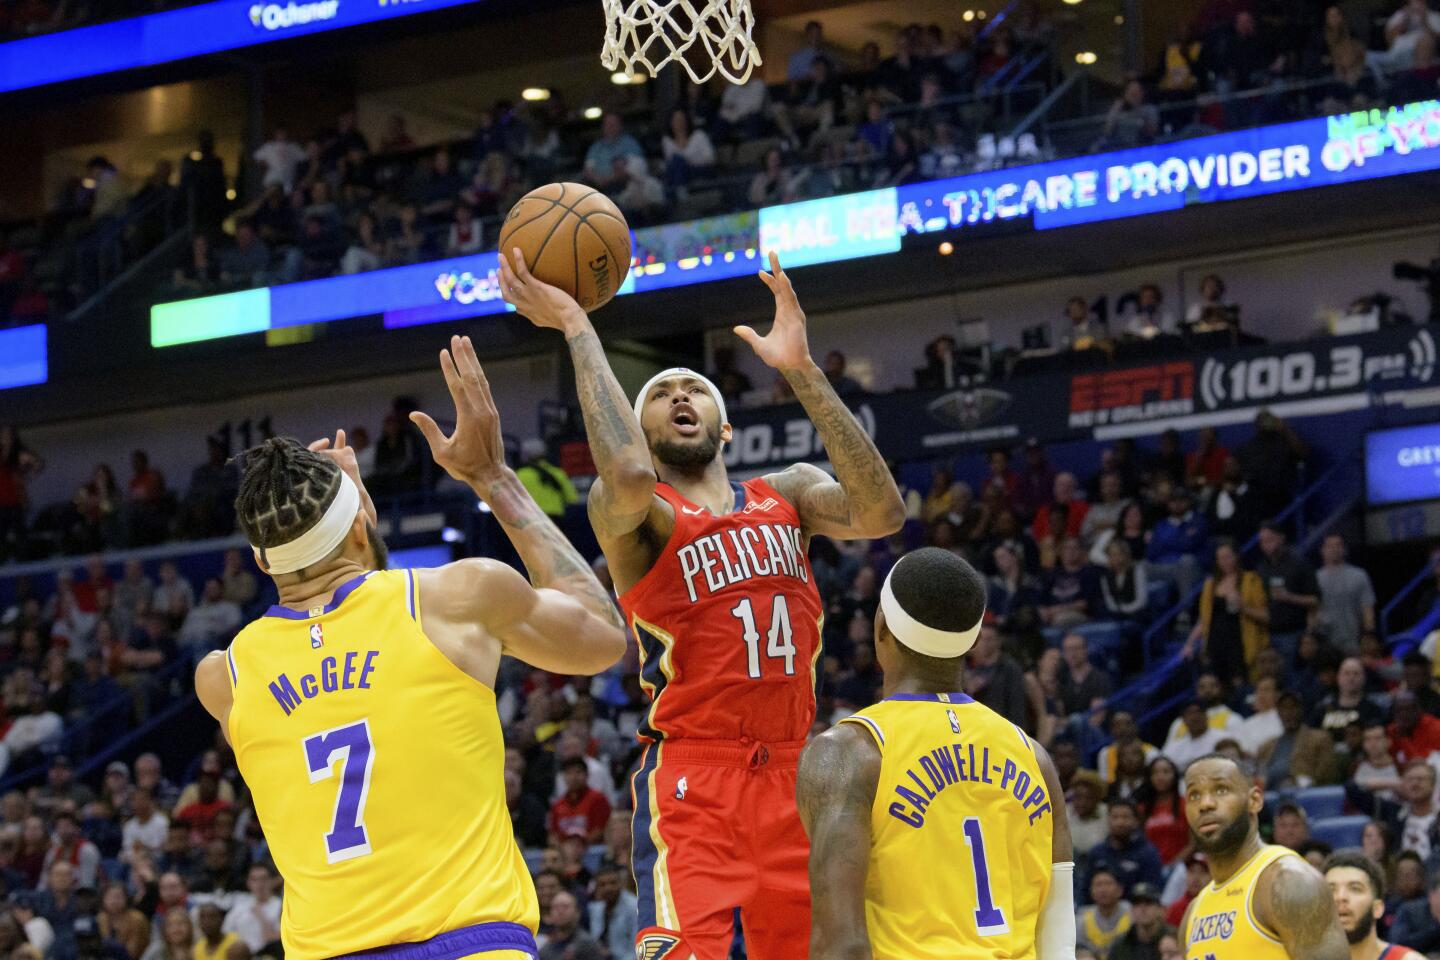 Brandon Ingram (14) had 23 points with 10 rebounds against the Lakers on Nov. 27.